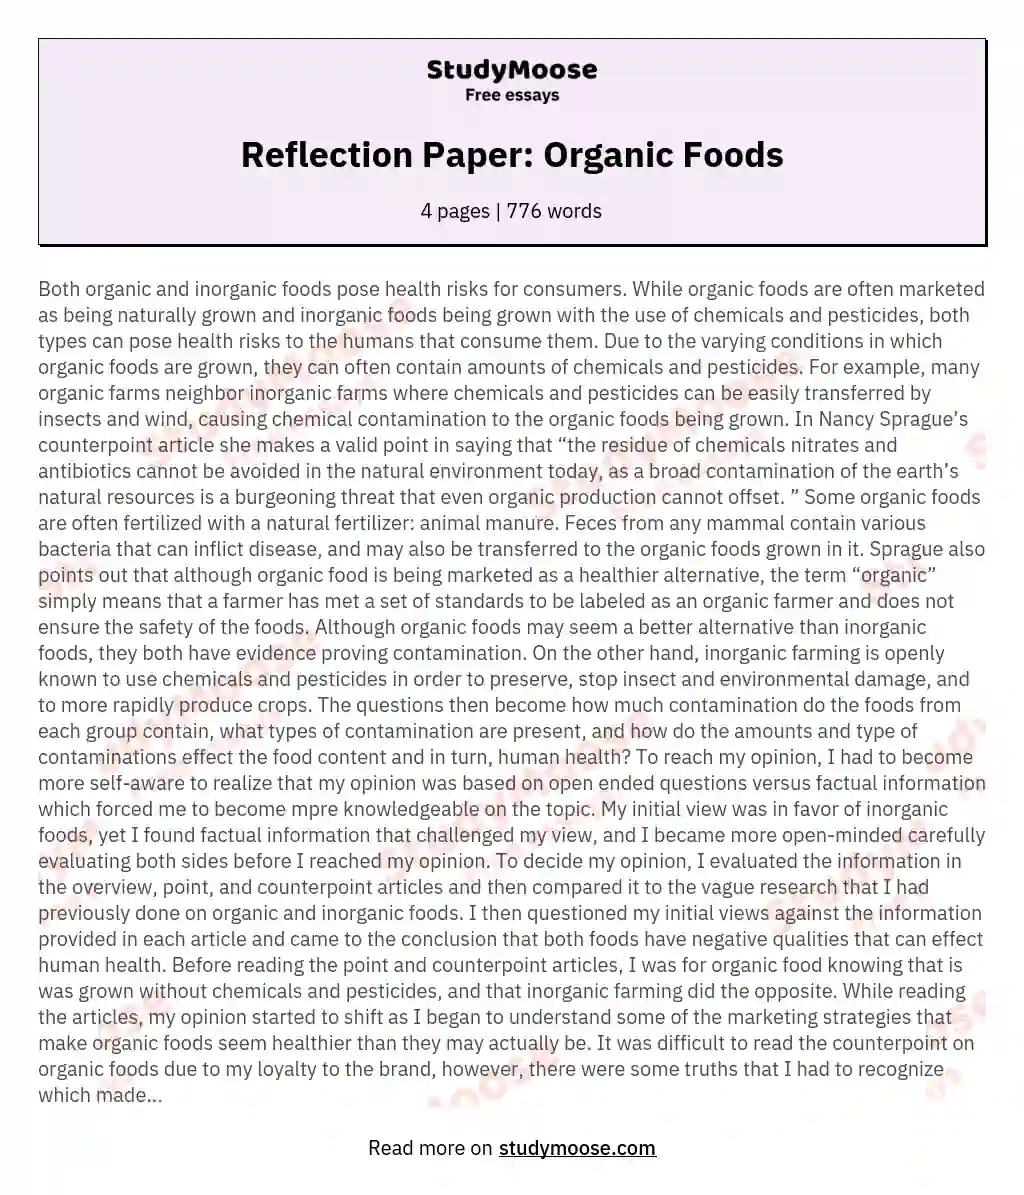 research paper on food product development